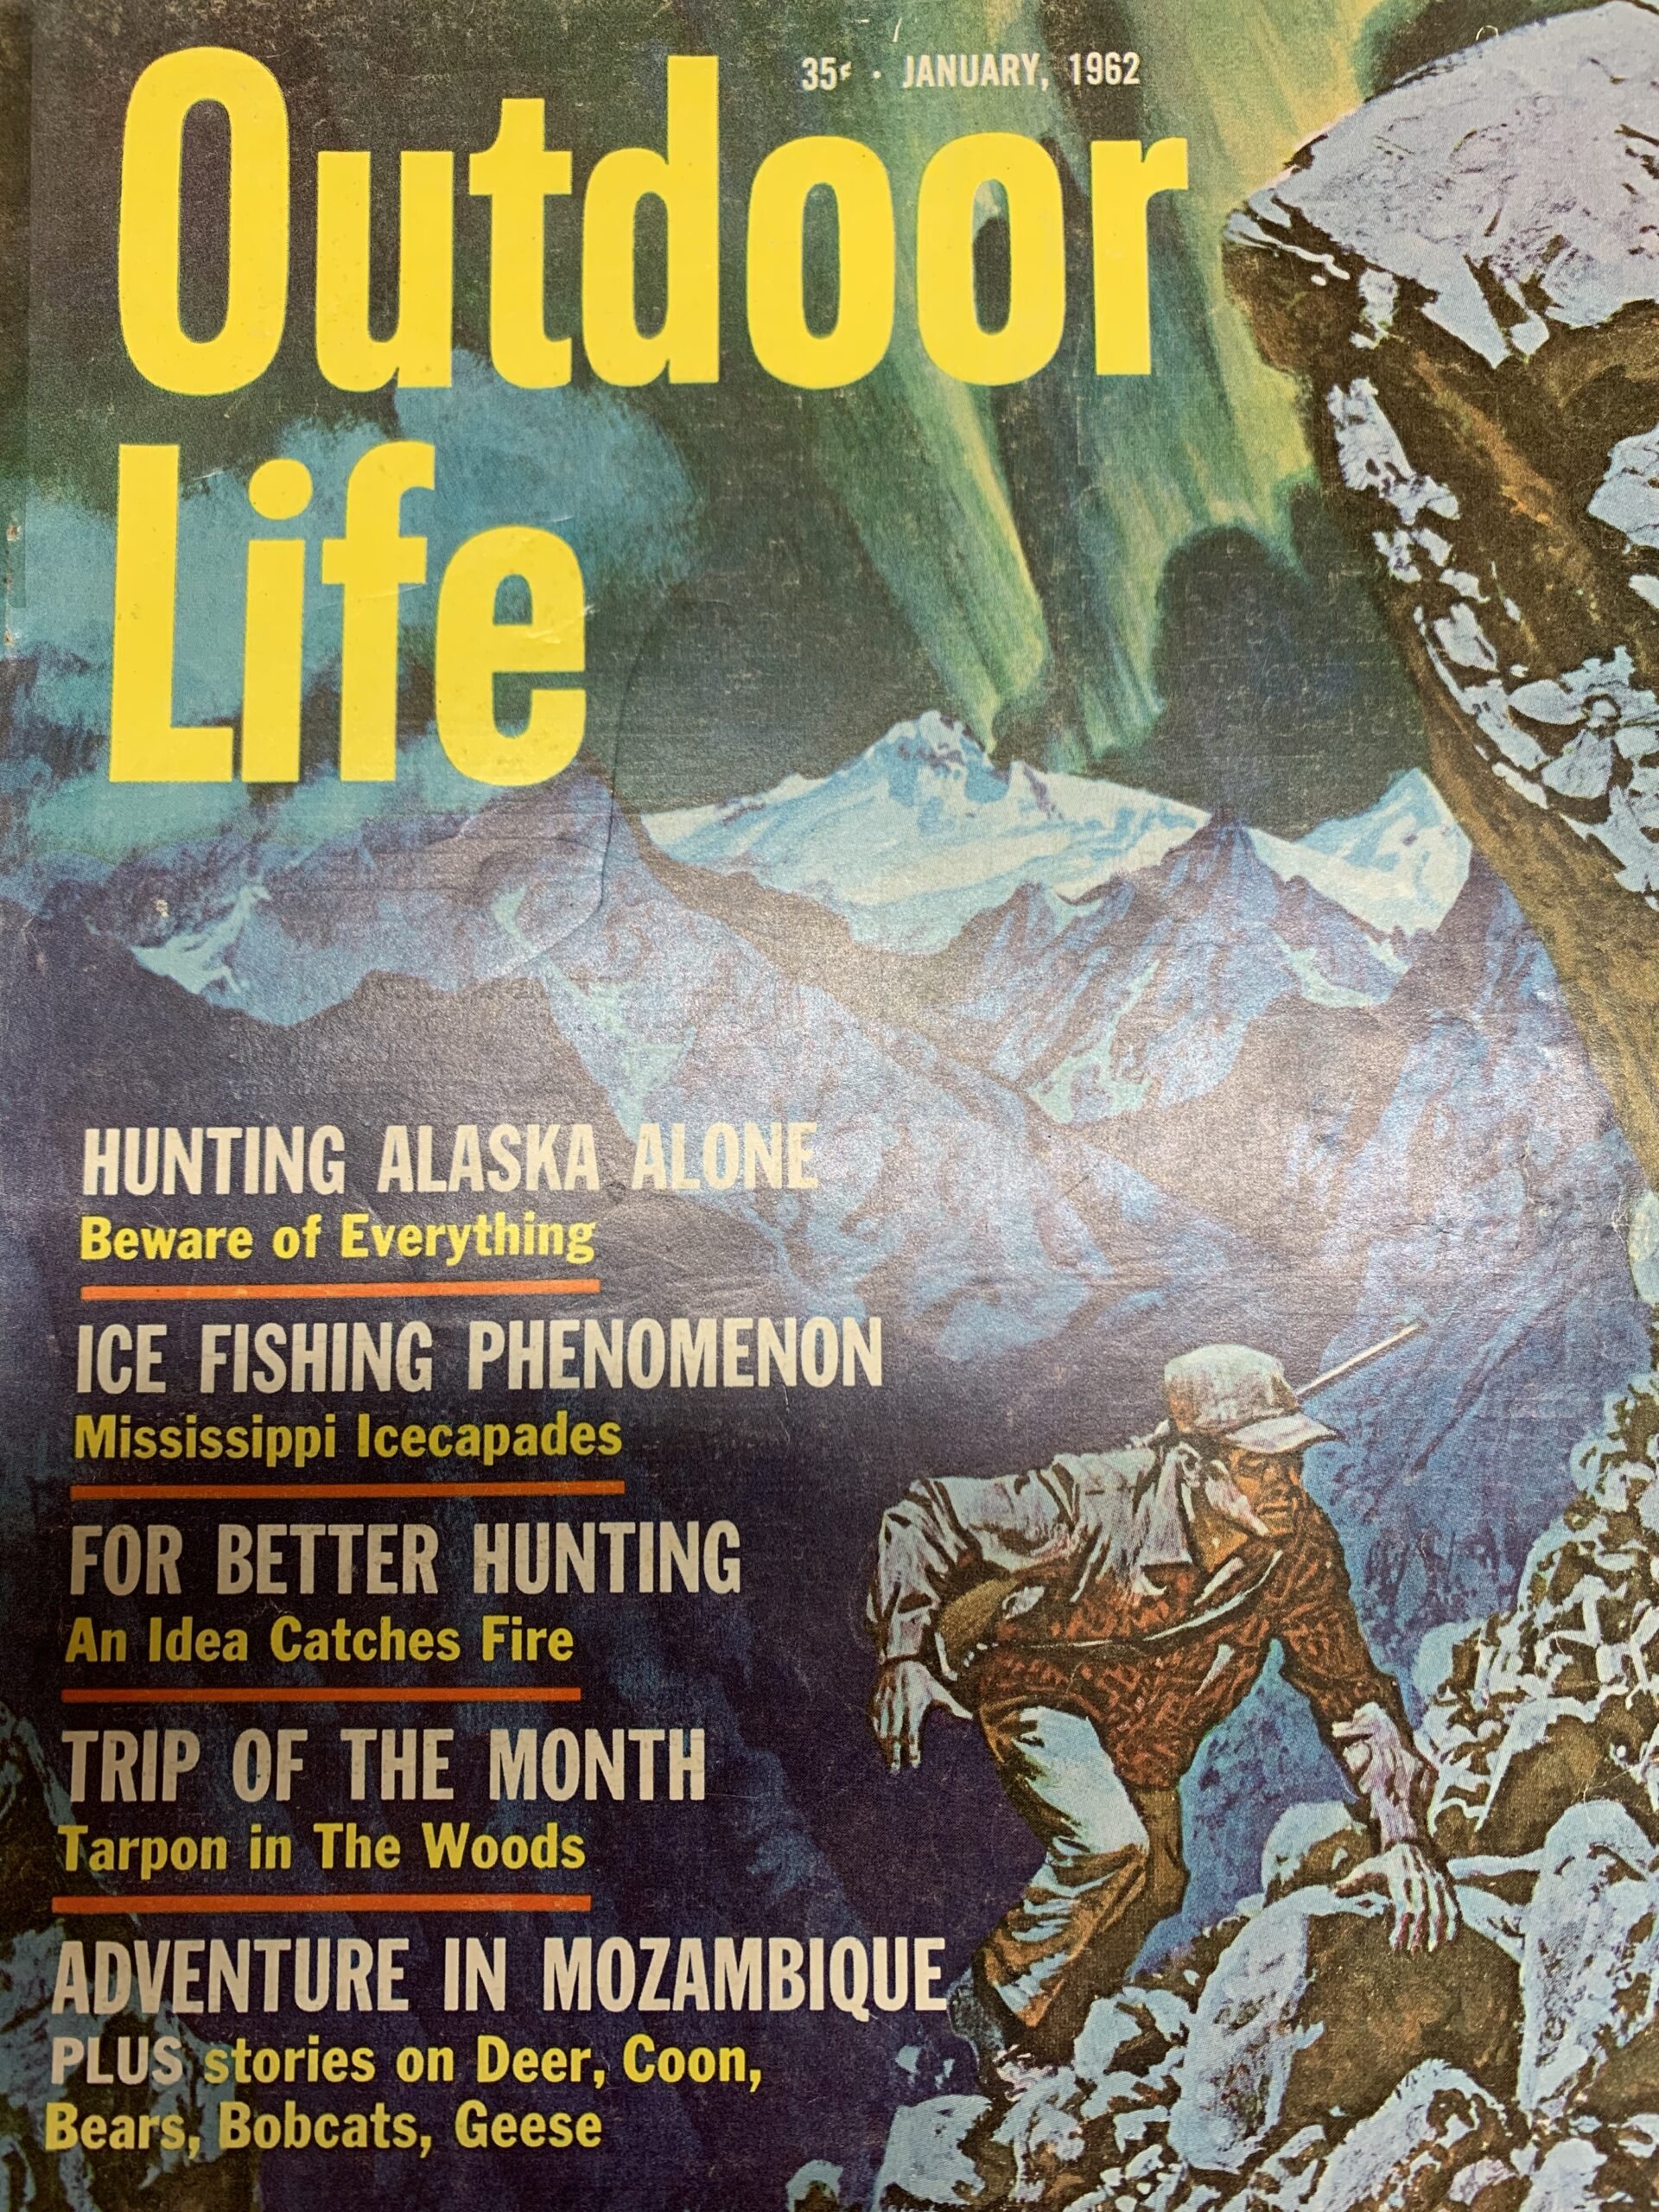 January, 1962 cover